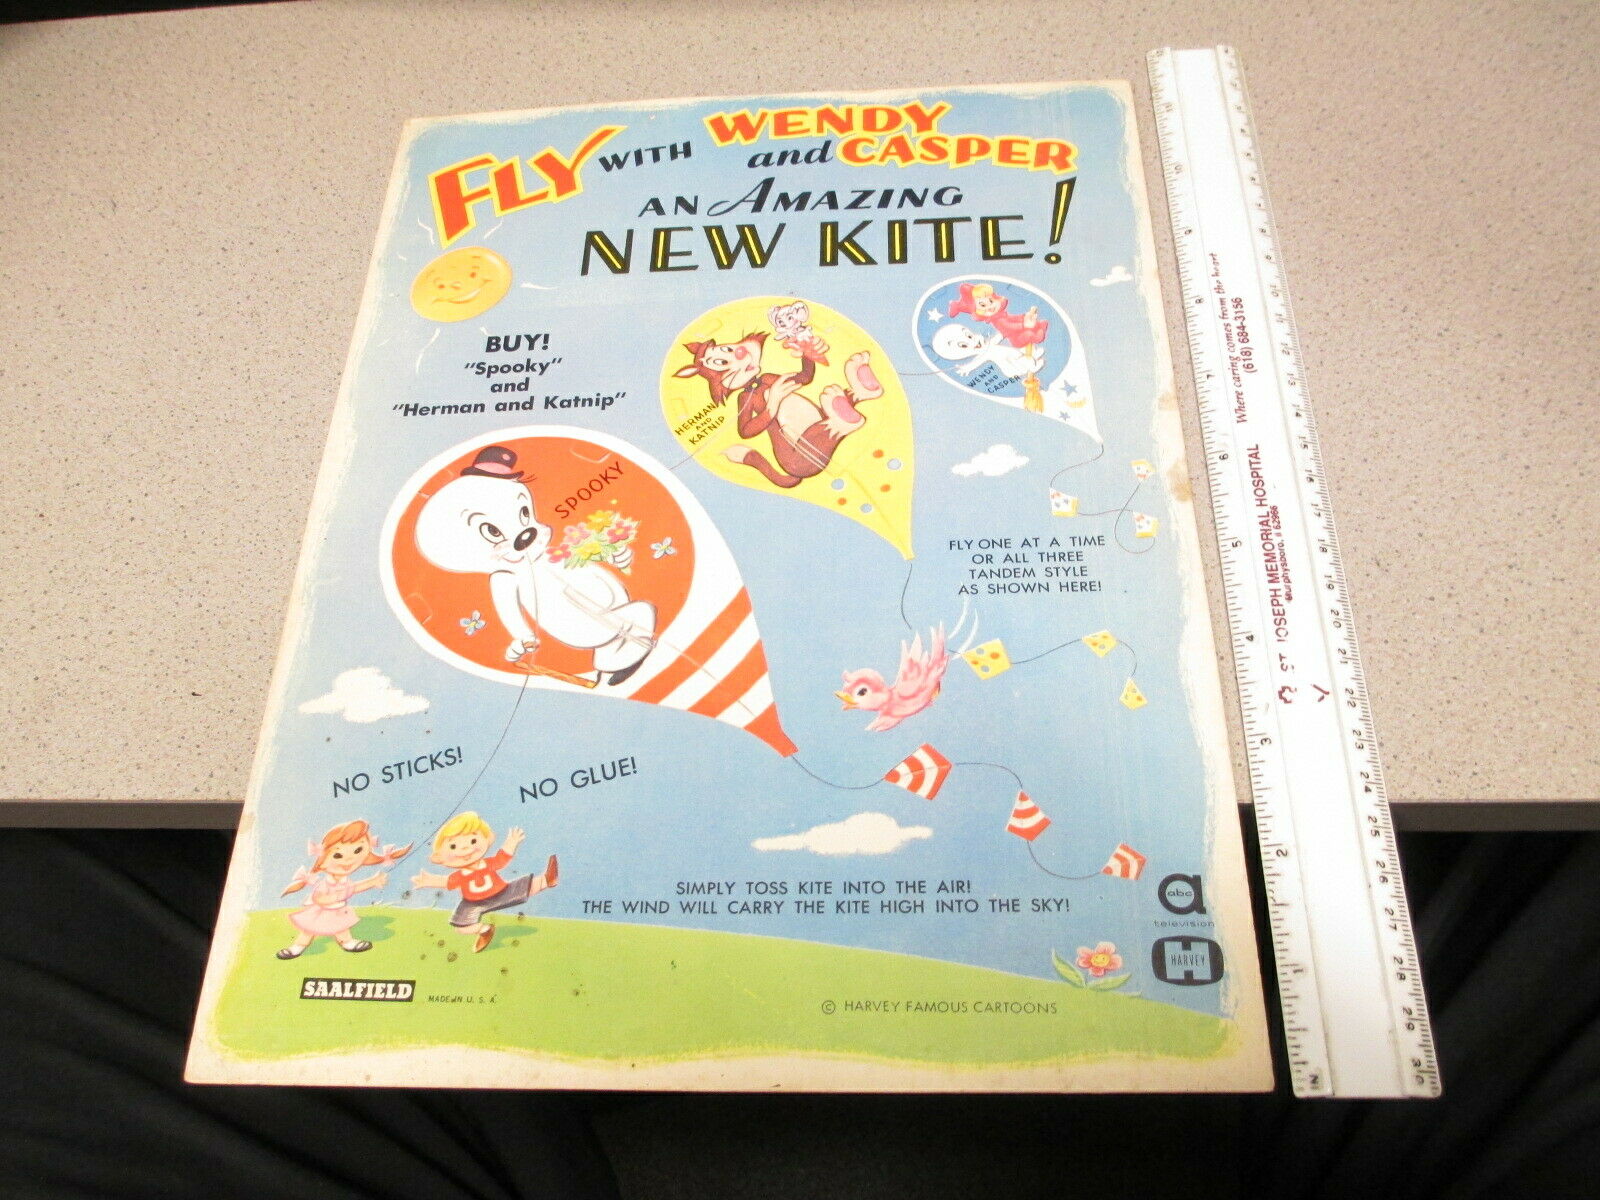 Harvey Comic Book Character Casper Wendy Witch 1950s Punchout Paper Doll Kite